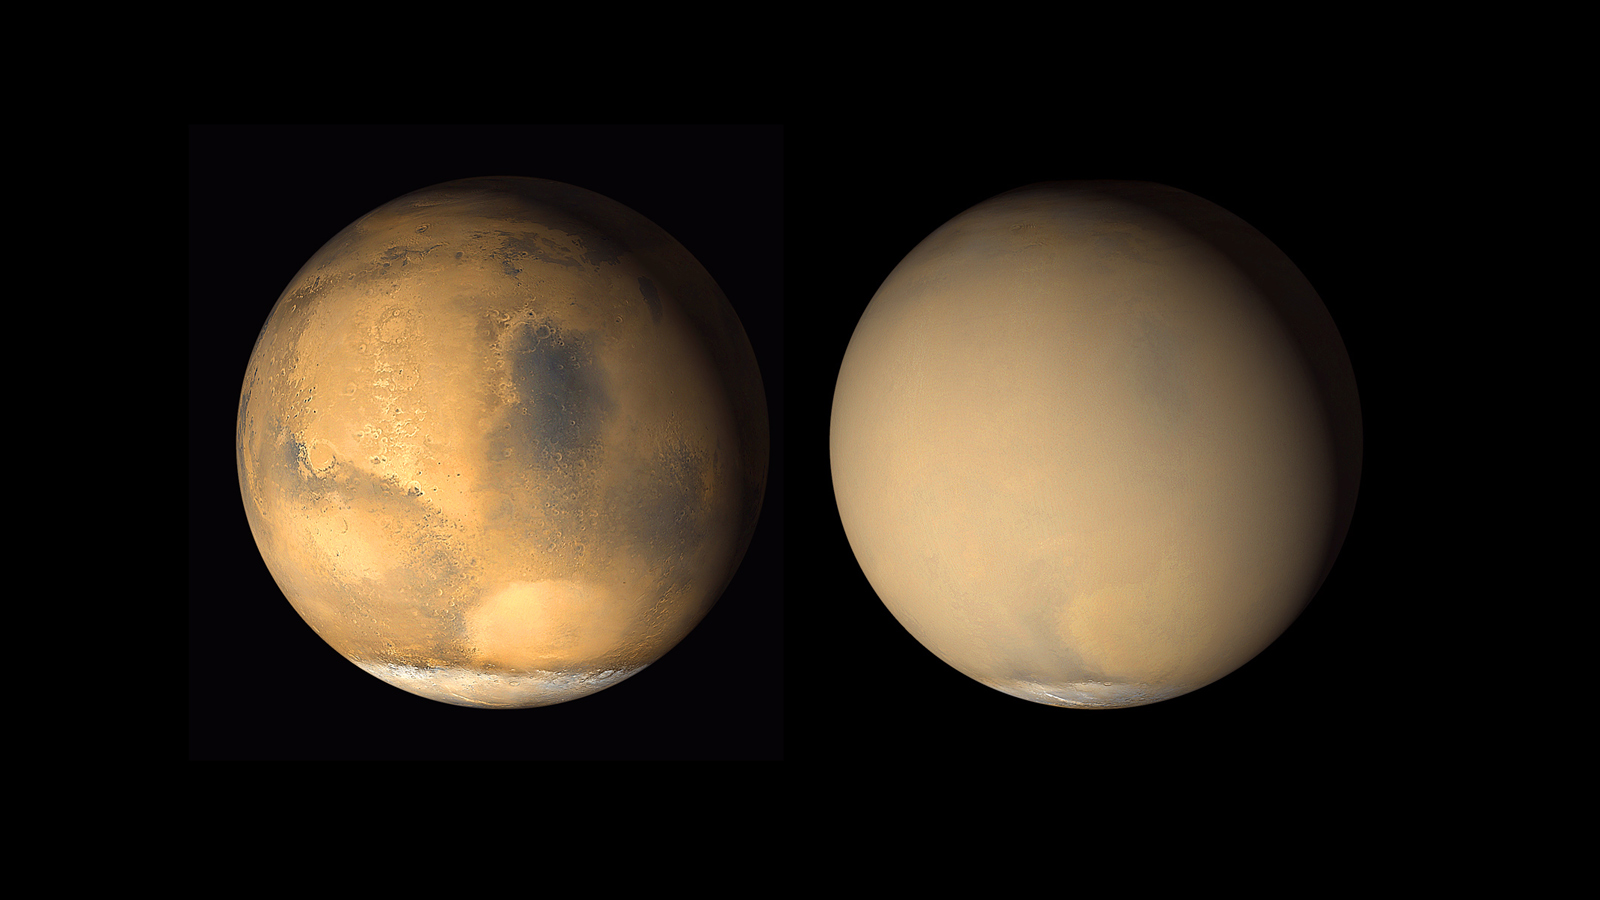 Two 2001 images from the Mars Orbiter Camera 